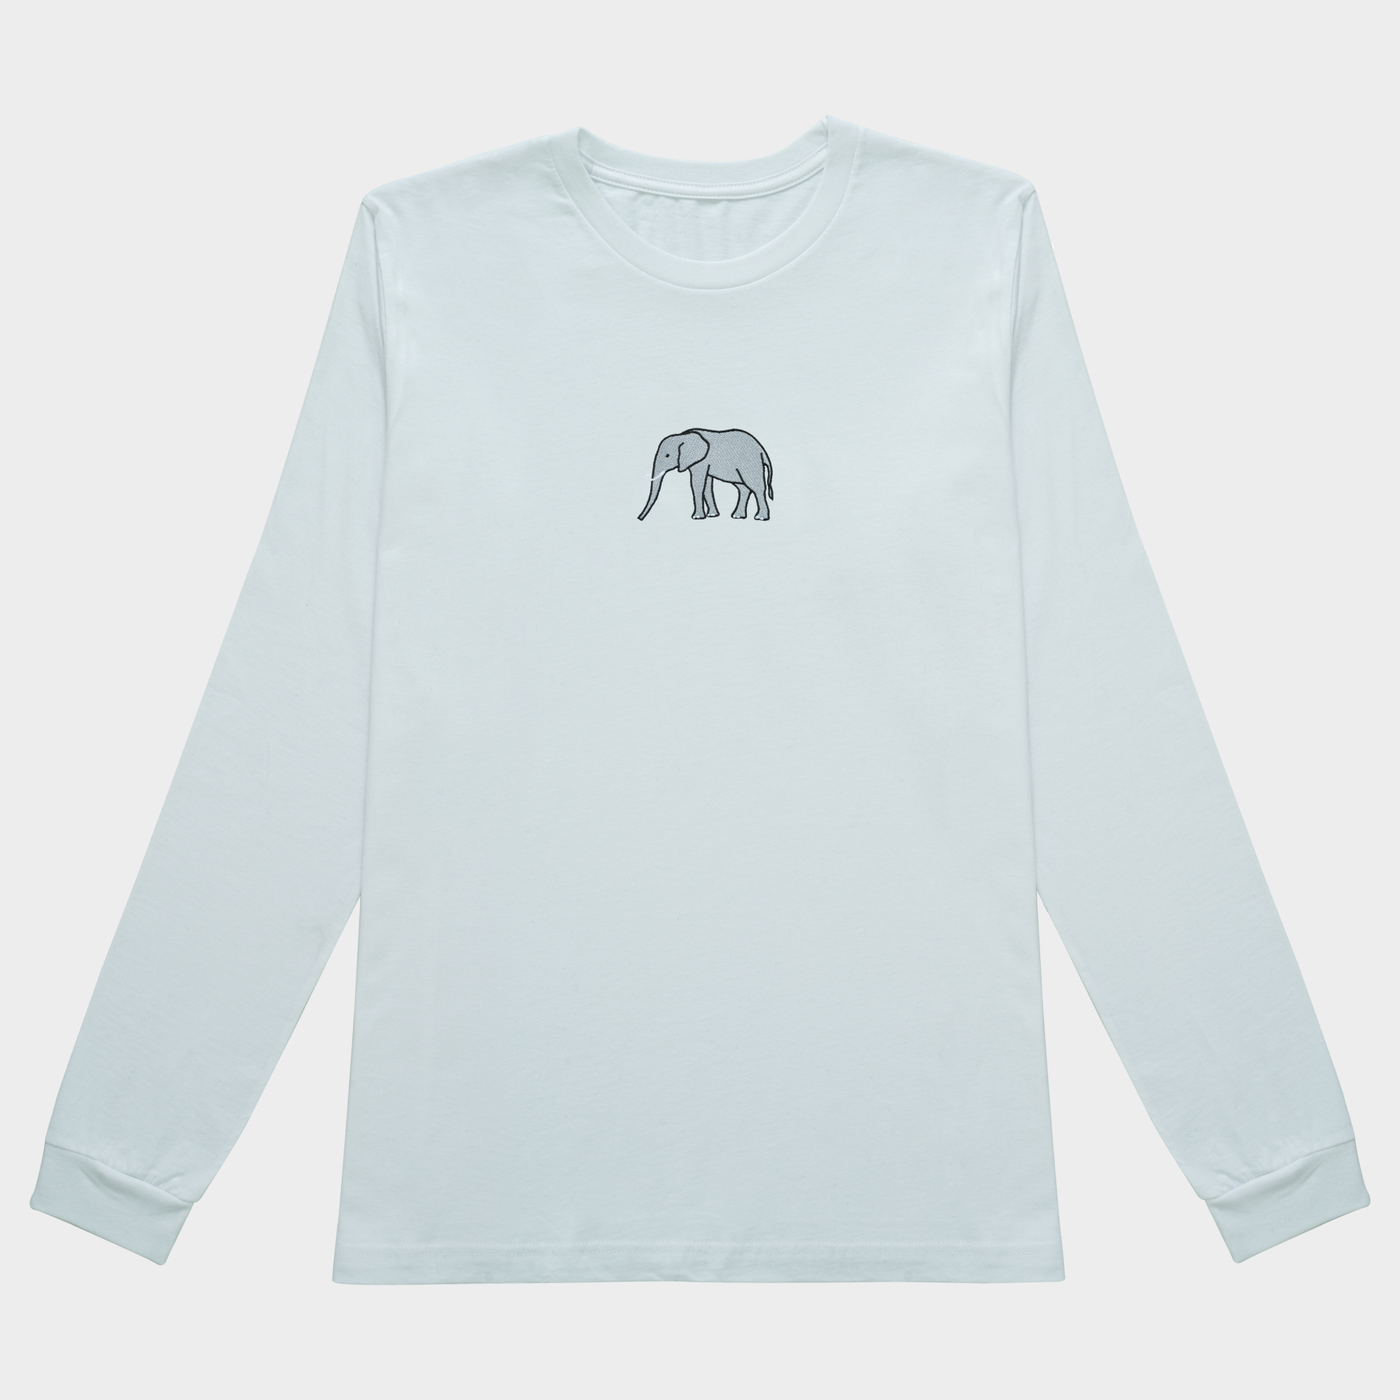 Bobby's Planet Women's Embroidered Elephant Long Sleeve Shirt from African Animals Collection in White Color#color_white